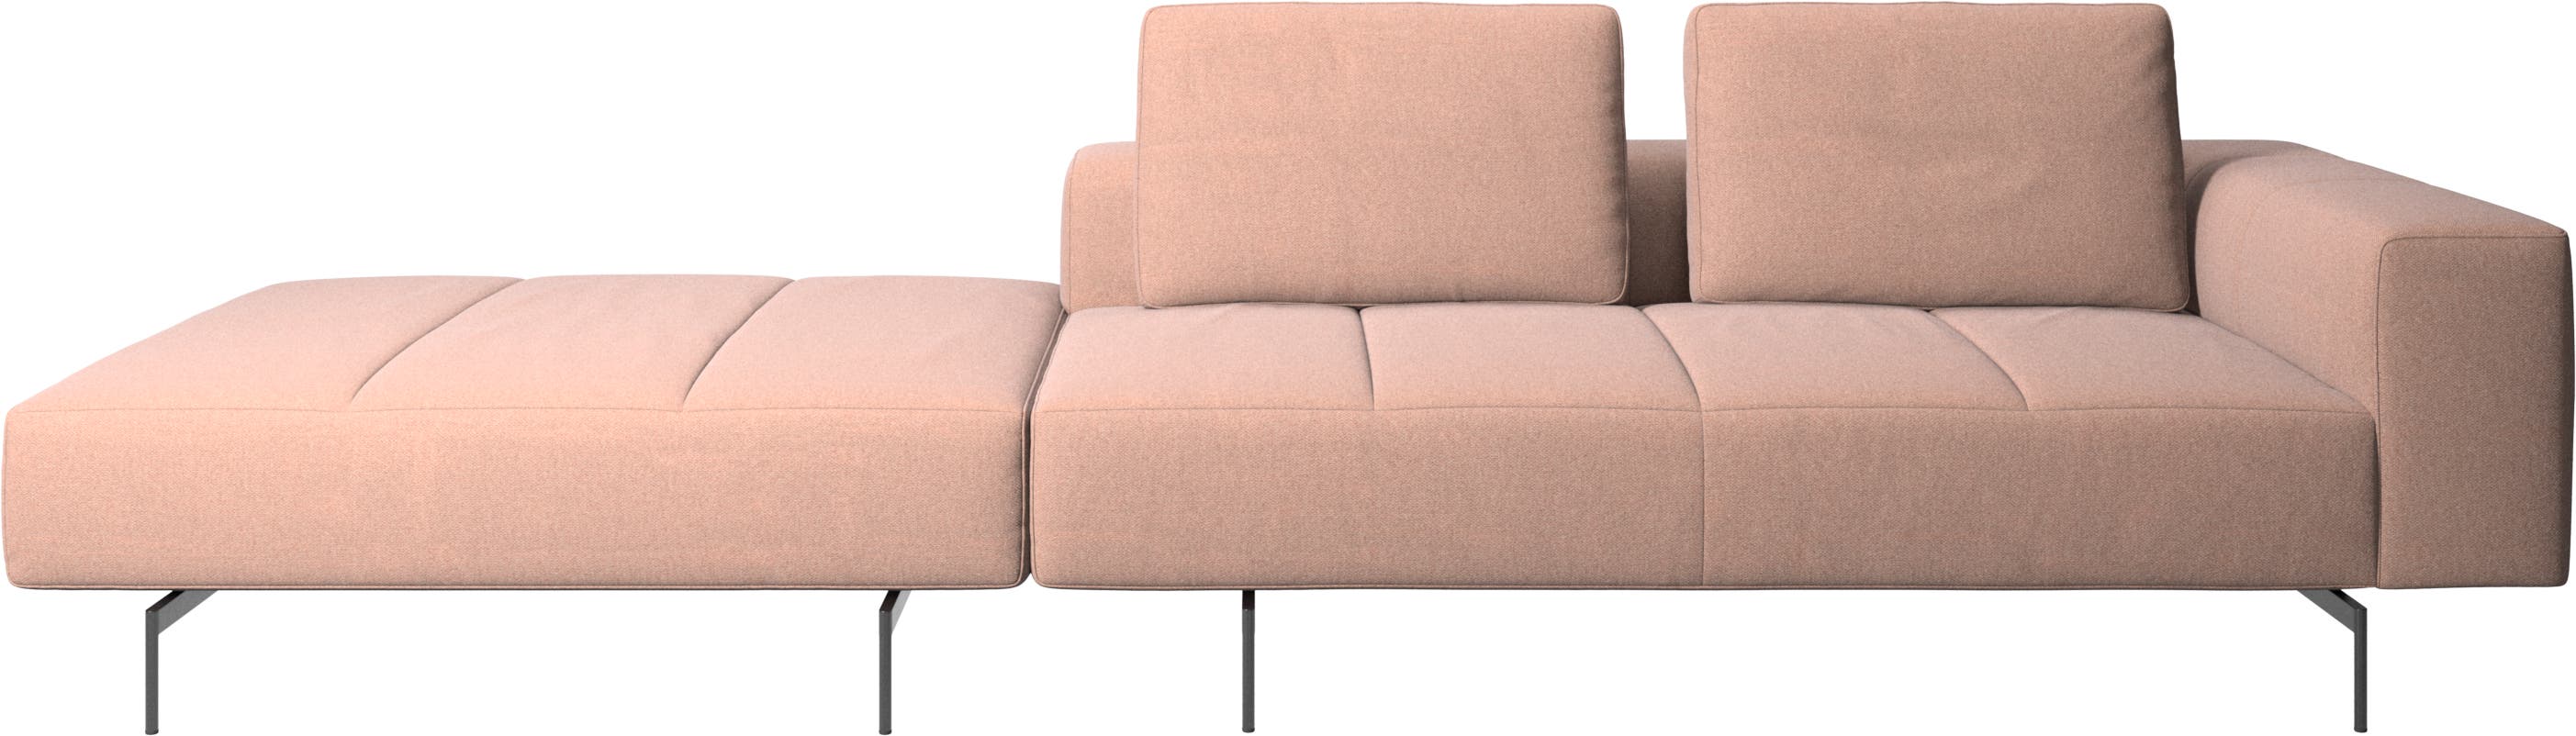 Amsterdam sofa with footstool on left side